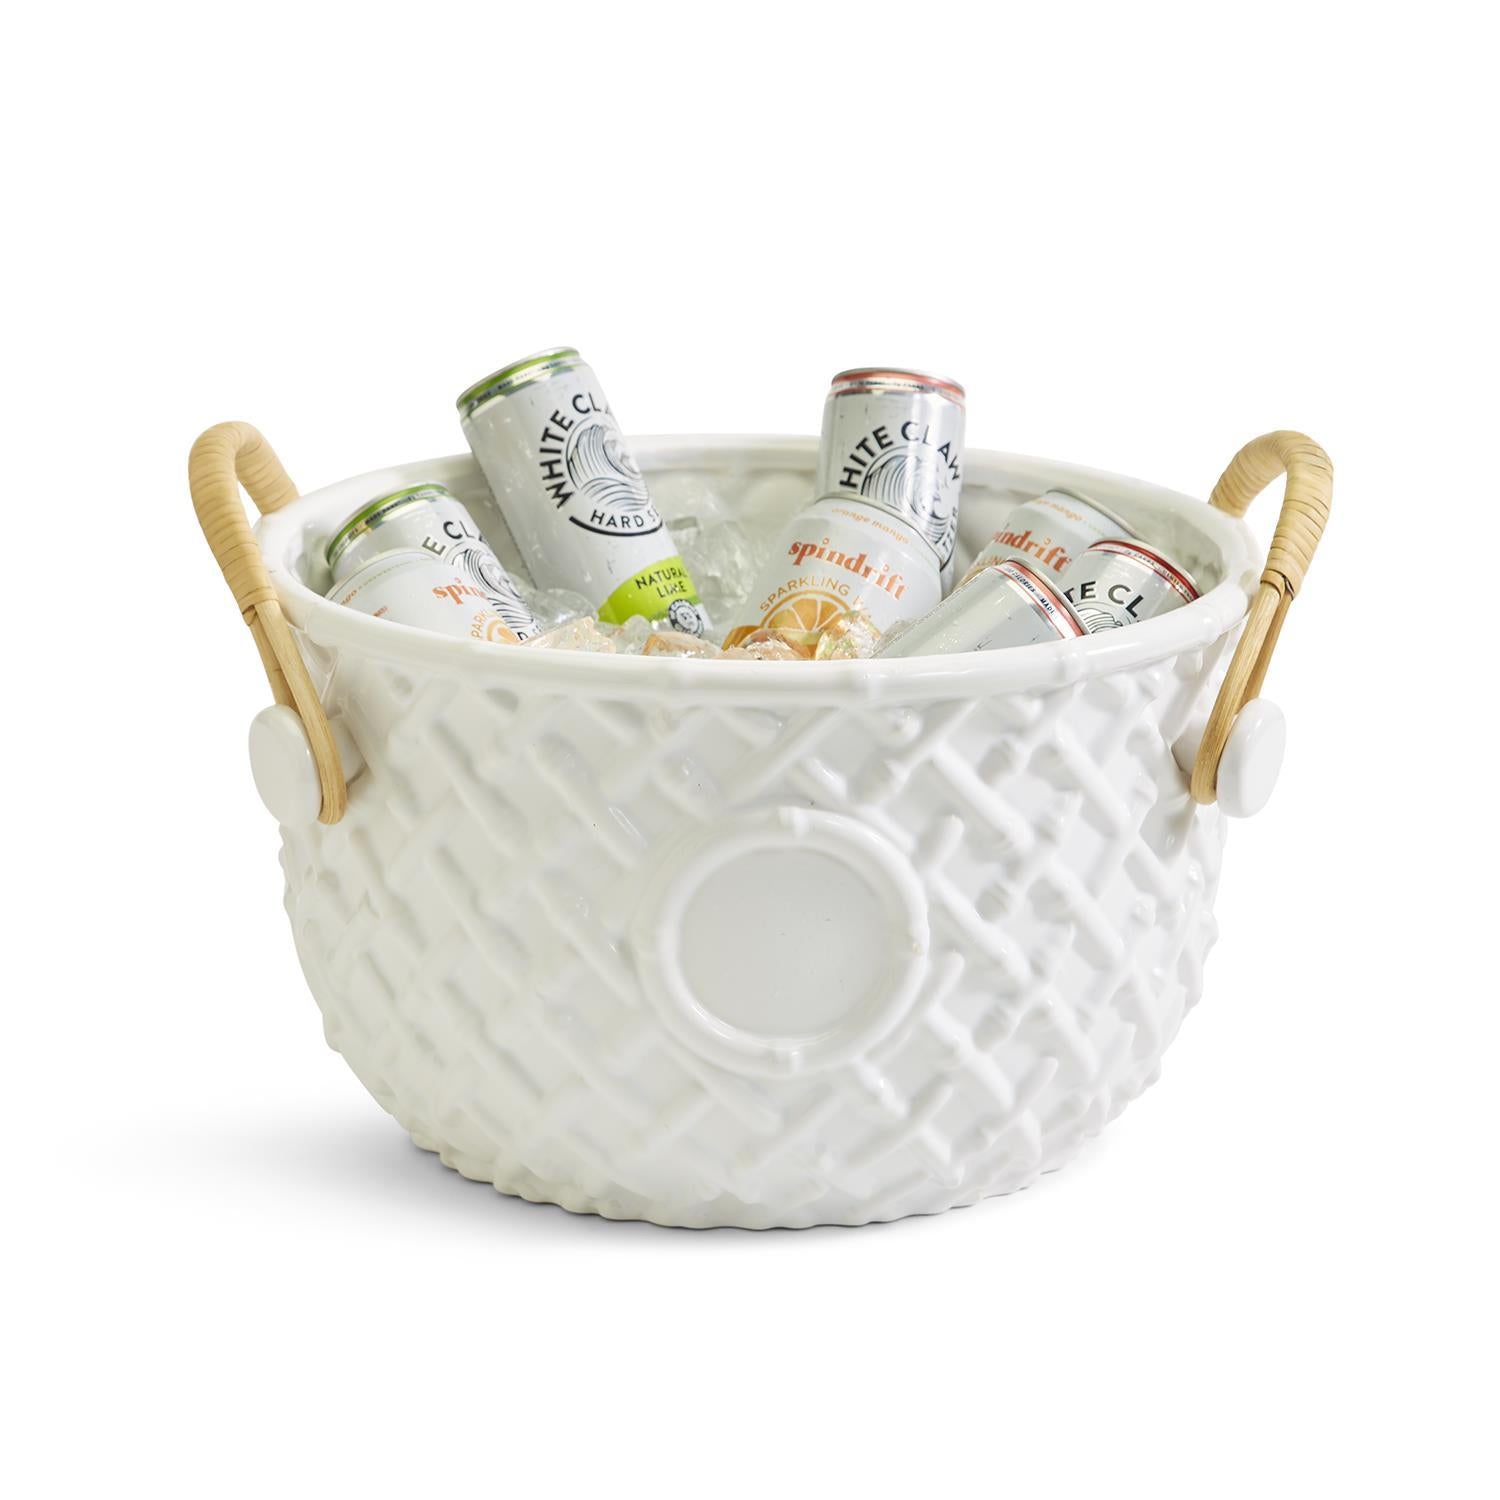 Hampton Faux Bamboo Fretwork Party Bucket with Bamboo Handles